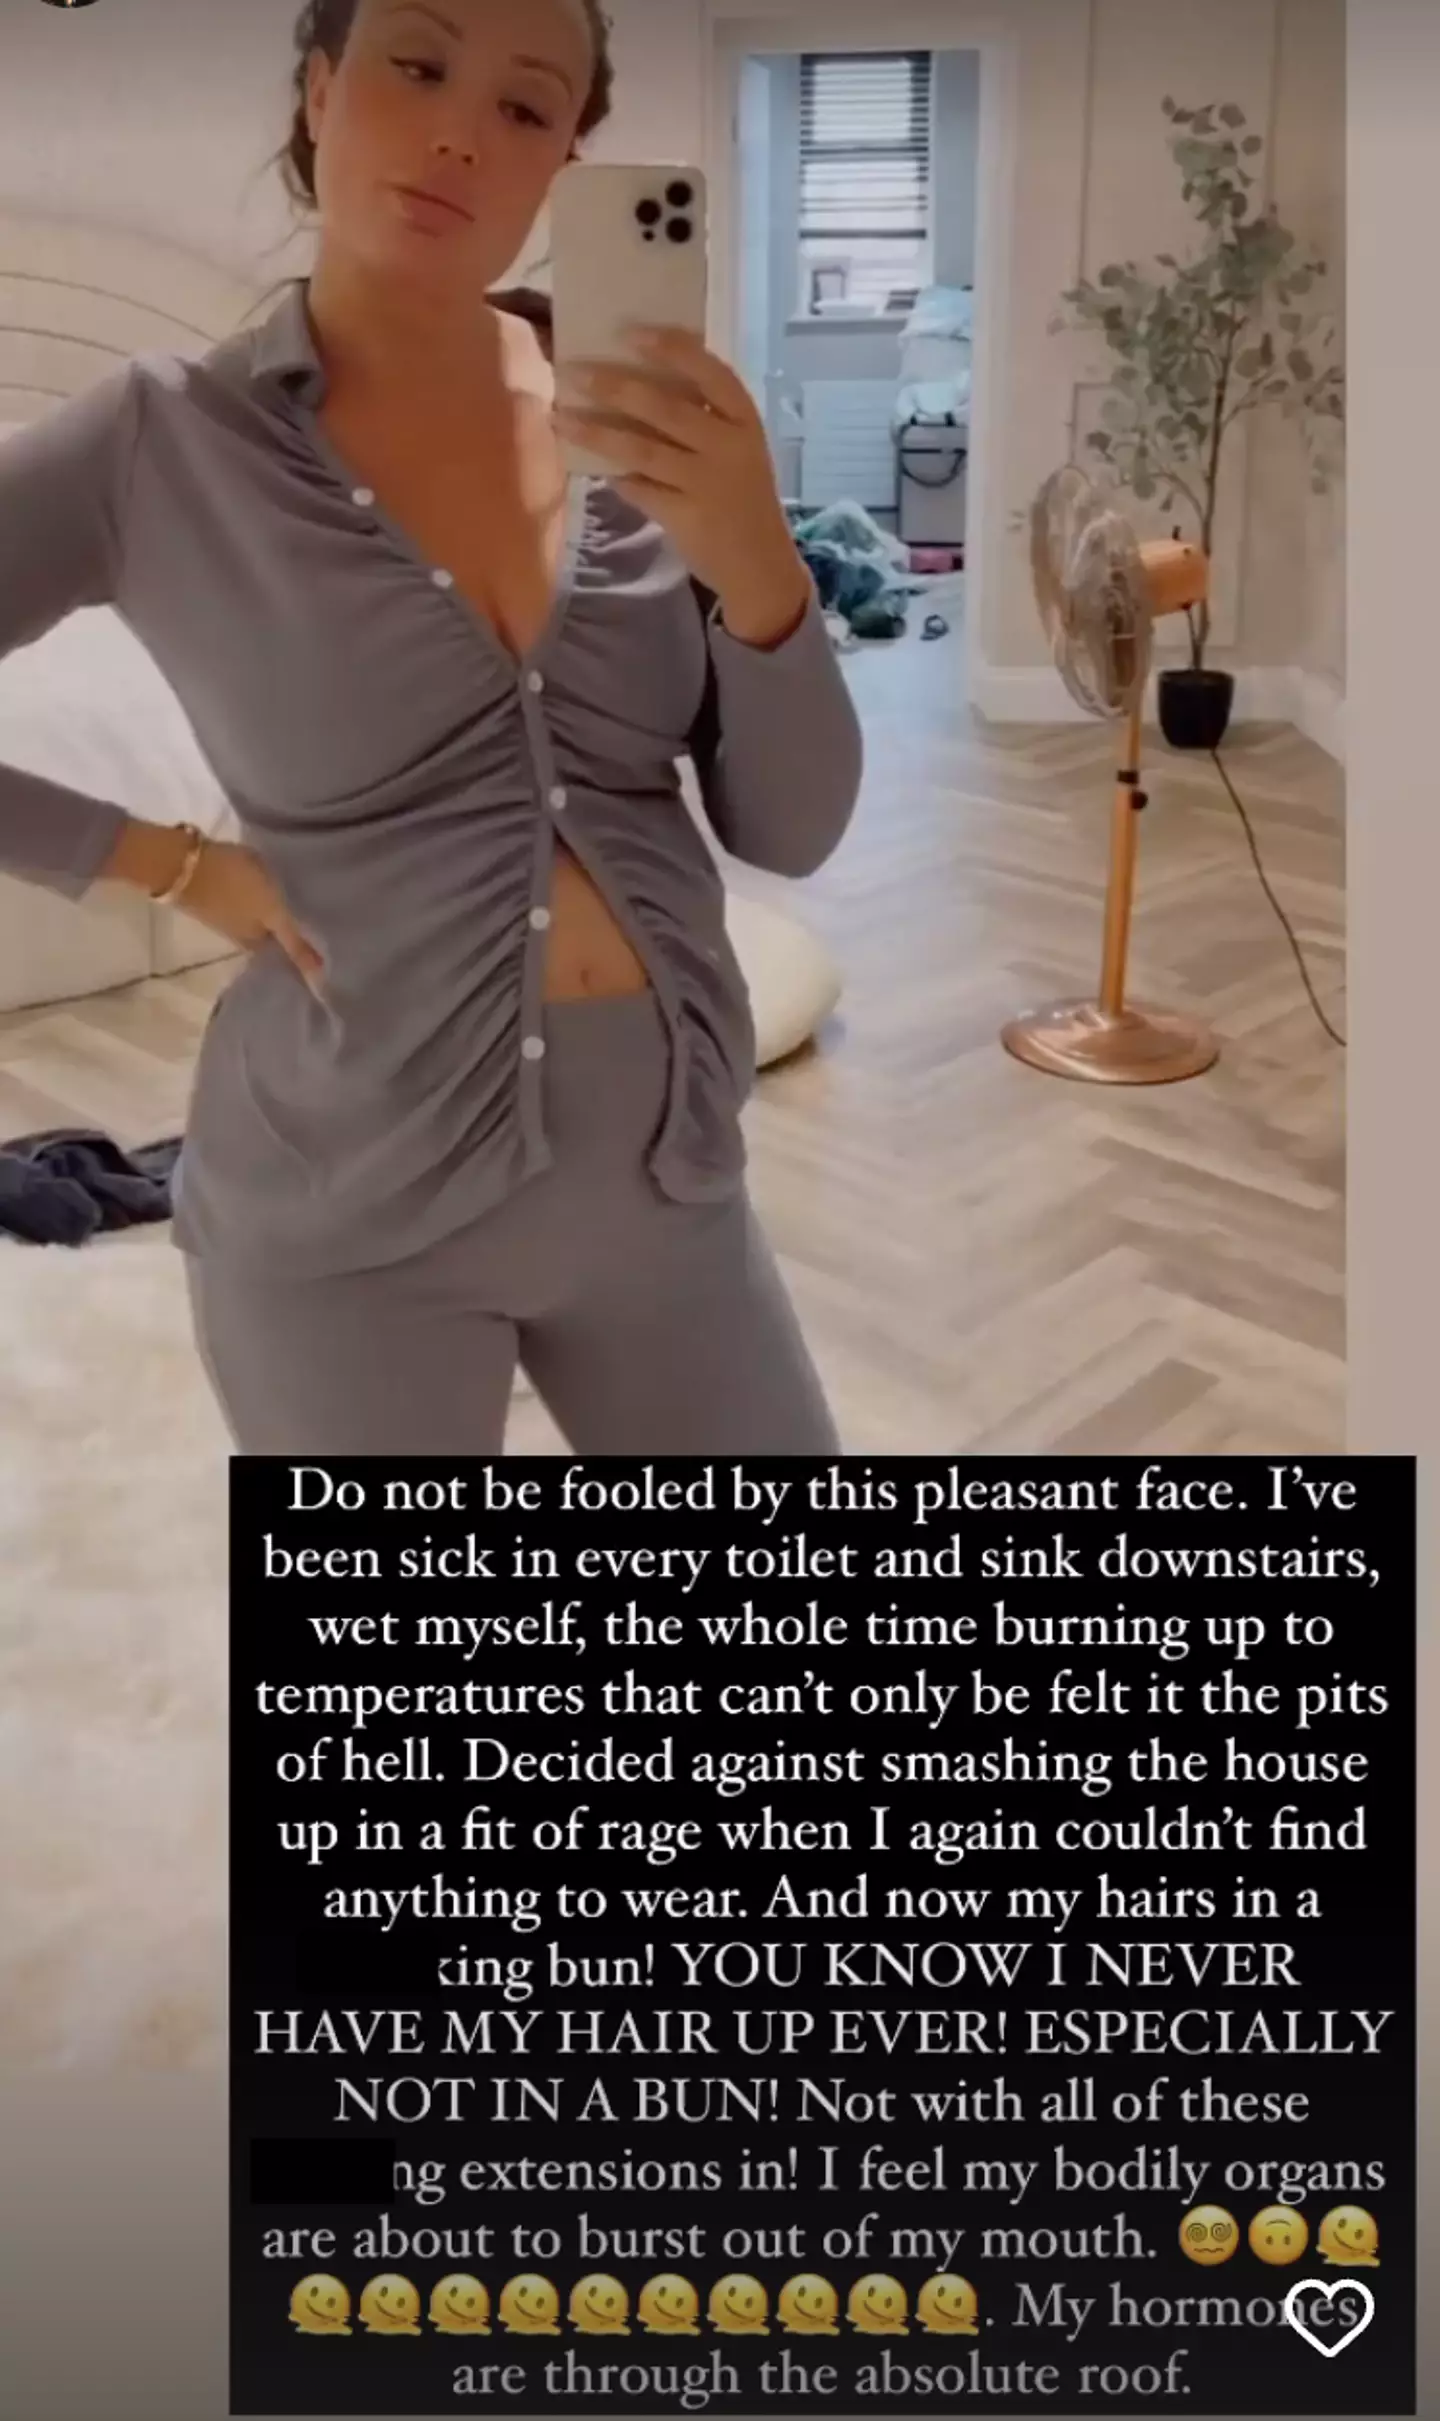 Charlotte Crosby has revealed she wet herself as she battles with pregnancy hormones (